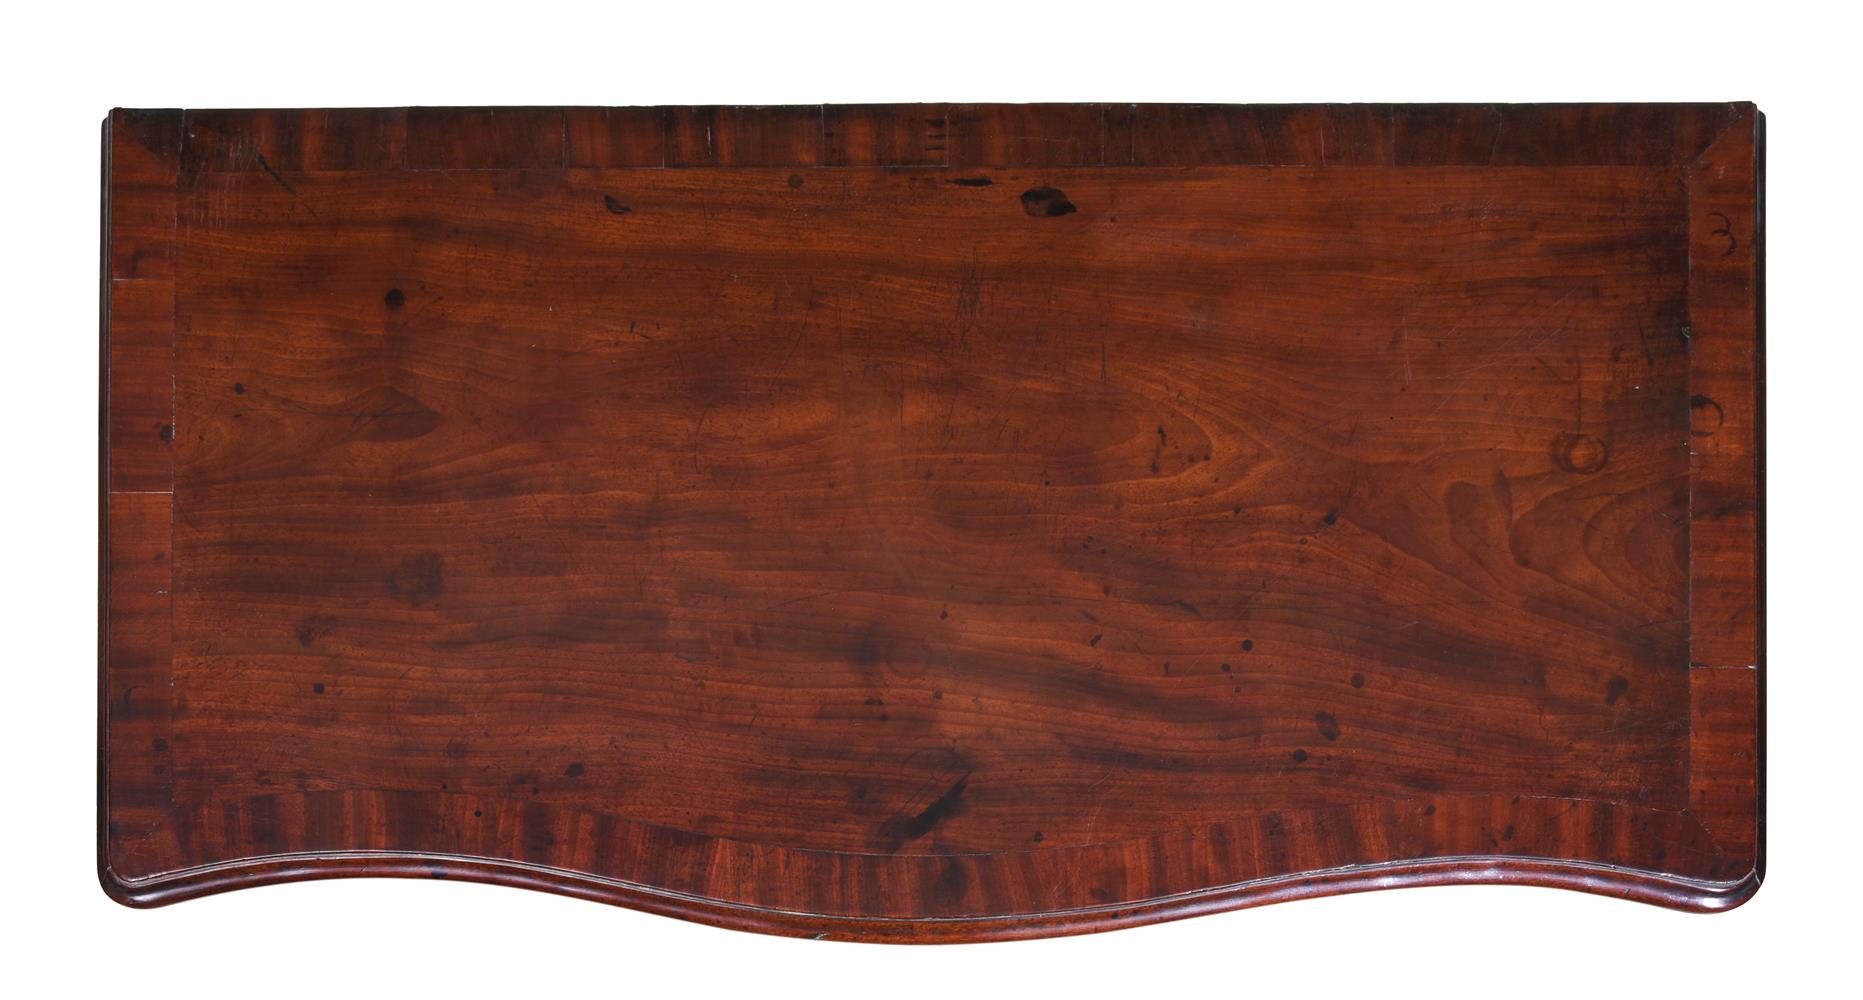 A GEORGE III 'FIDDLEBACK' MAHOGANY SERPENTINE FRONTED COMMODE, CIRCA 1770 - Image 2 of 5